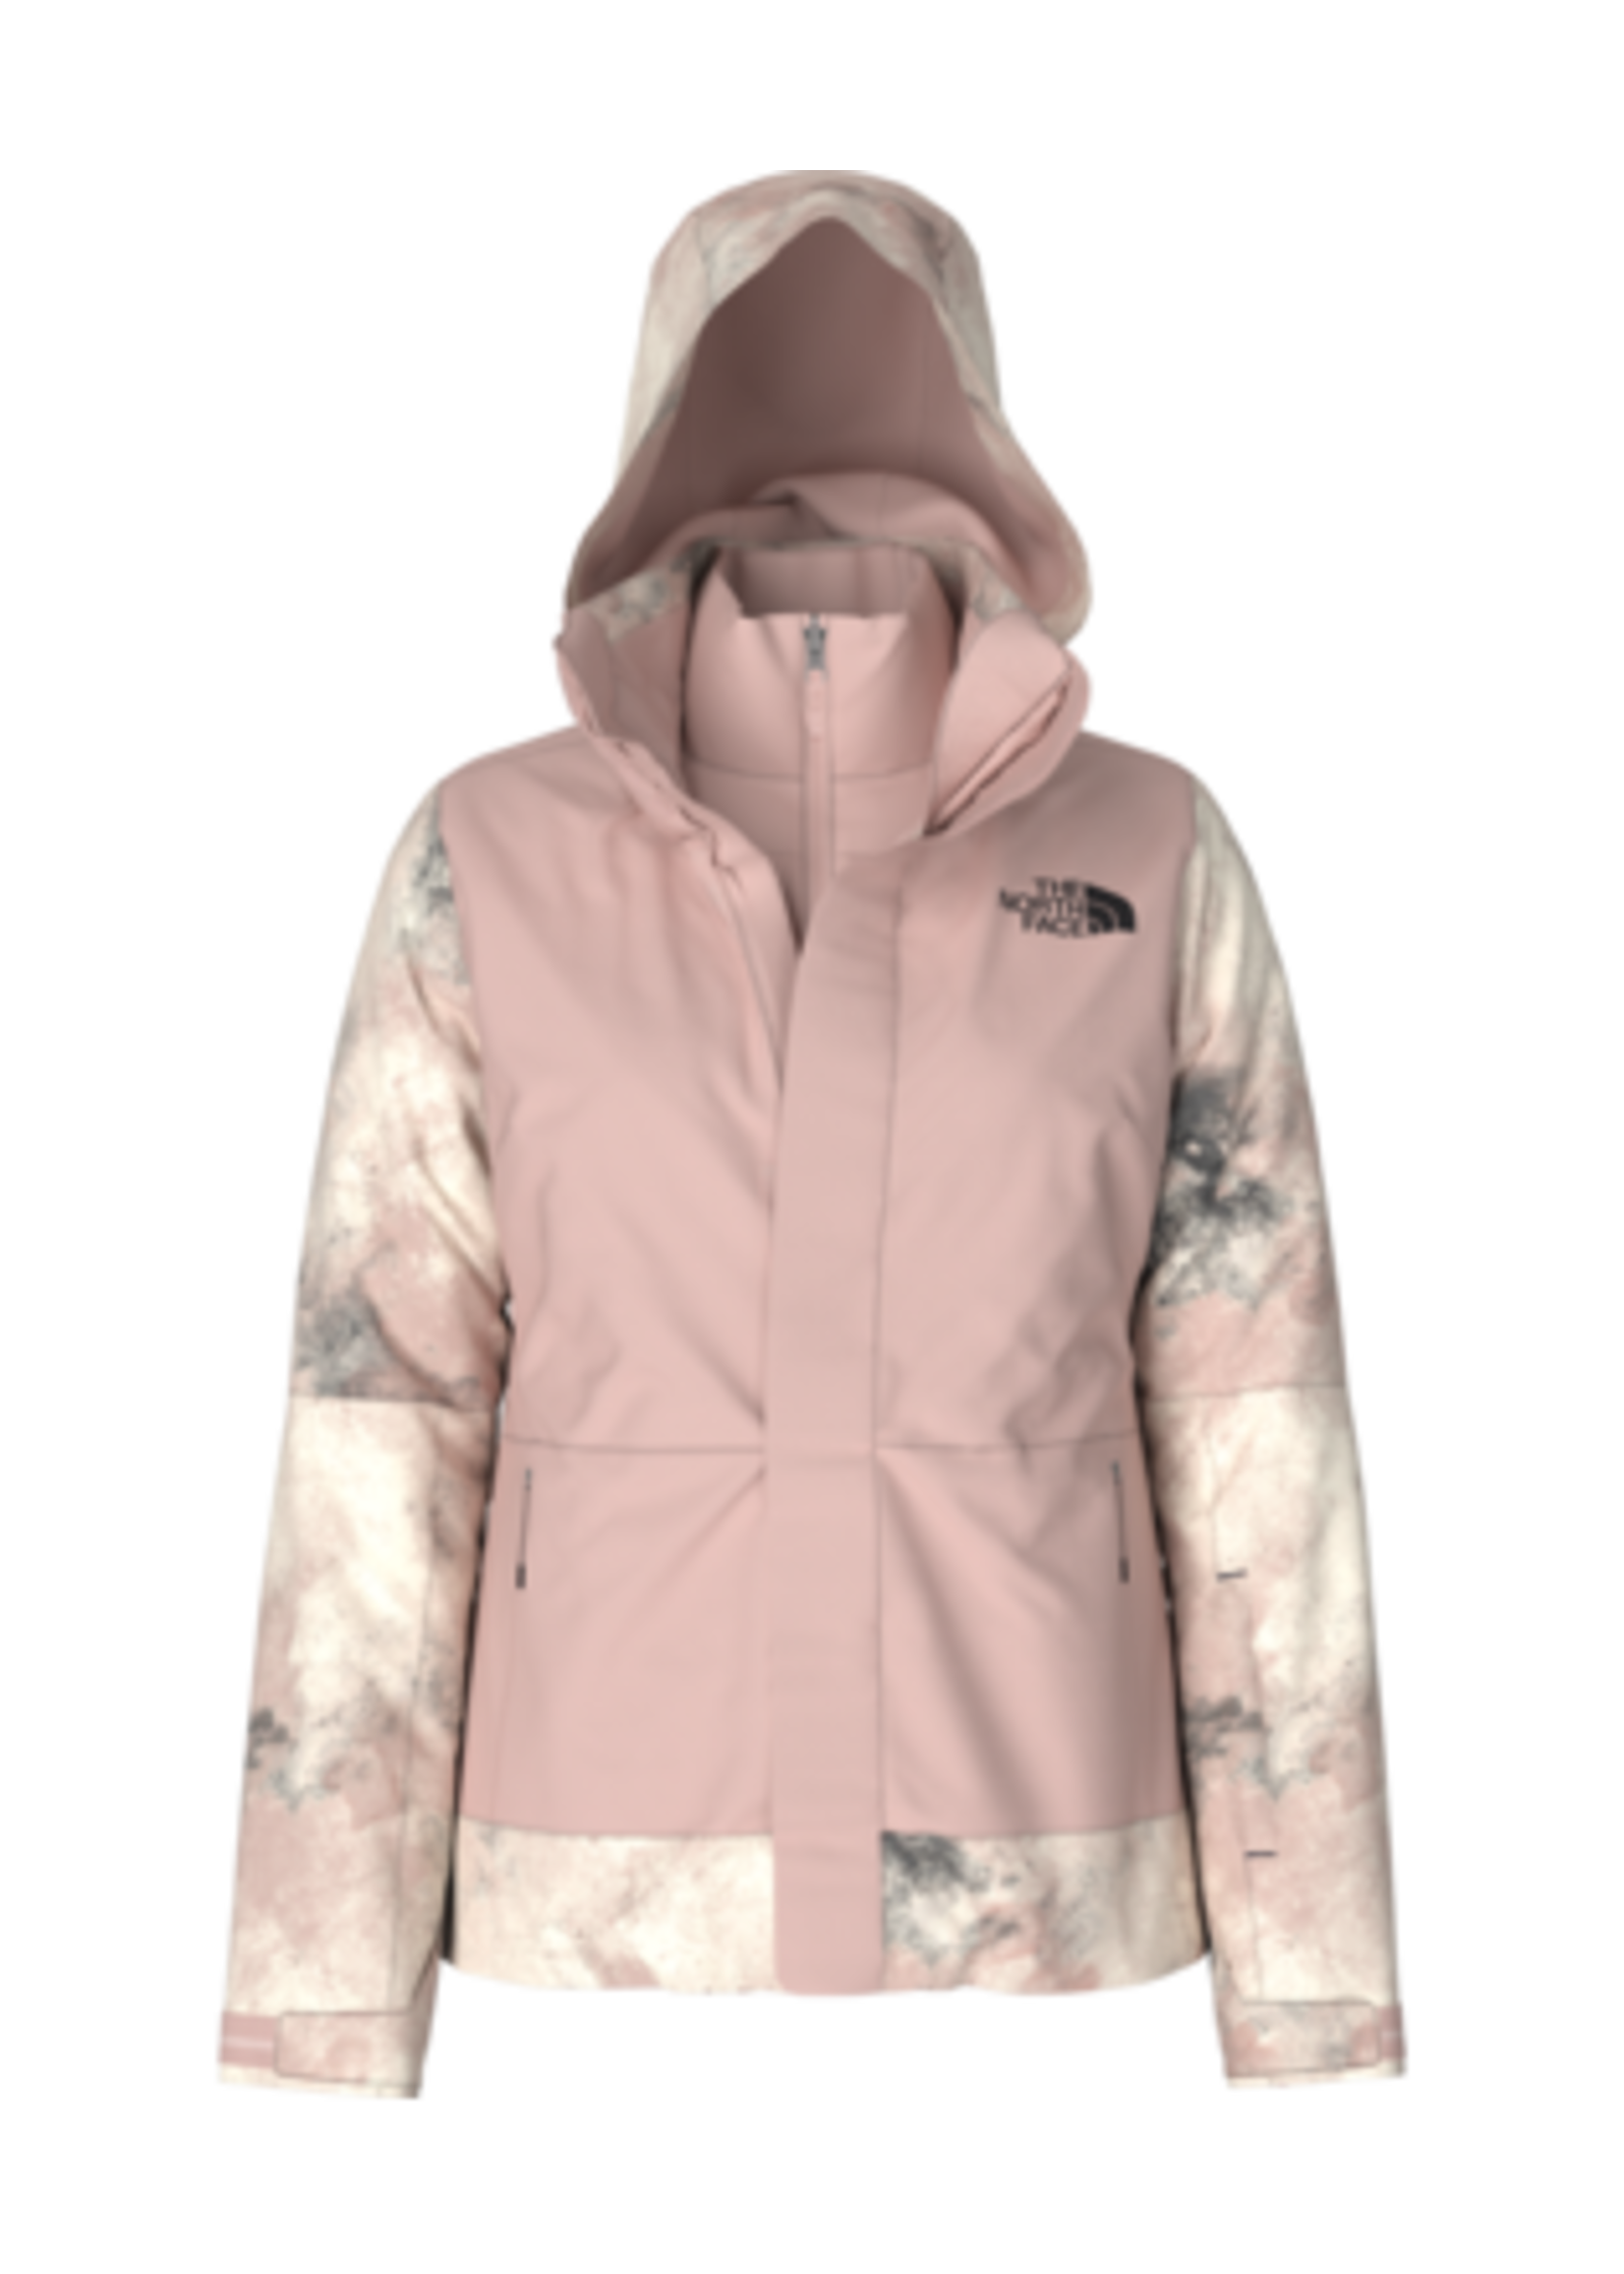 The North Face Womens Garner Triclimate® Jacket - Pink Moss Faded Dye Camo Print